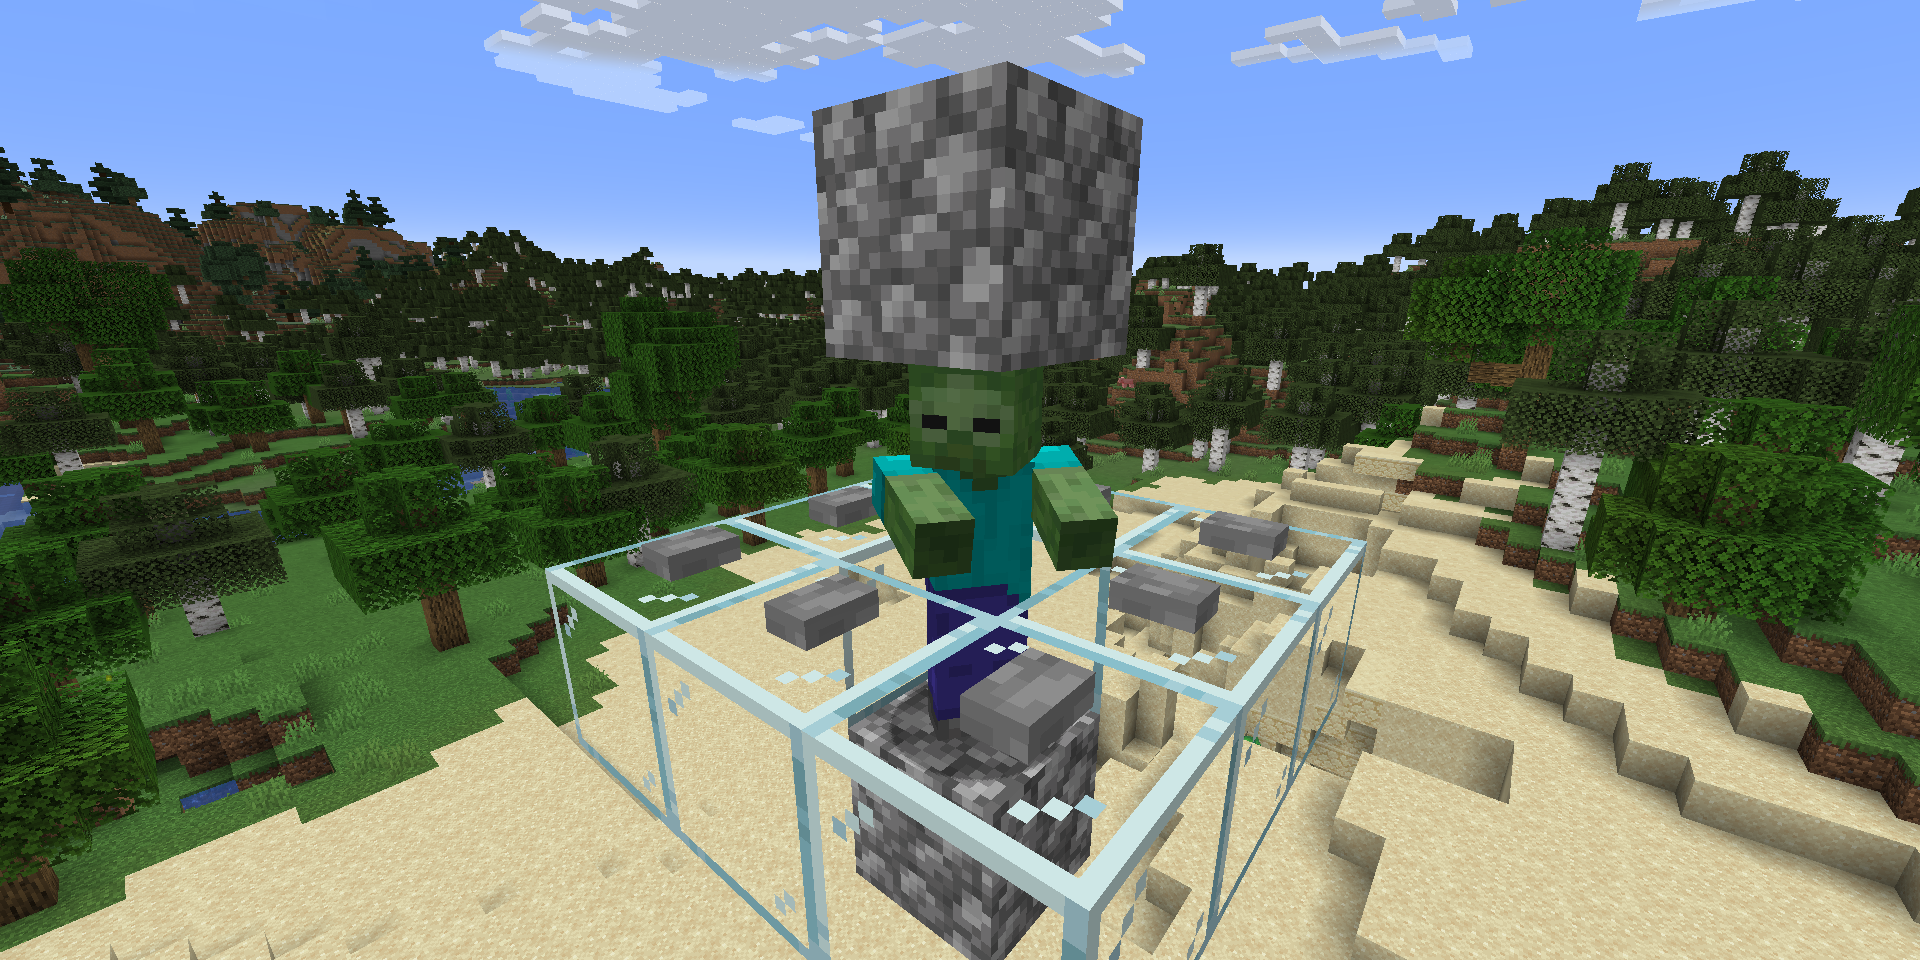 A trapped Minecraft zombie surrounded by glass, cobblestone, and buttons